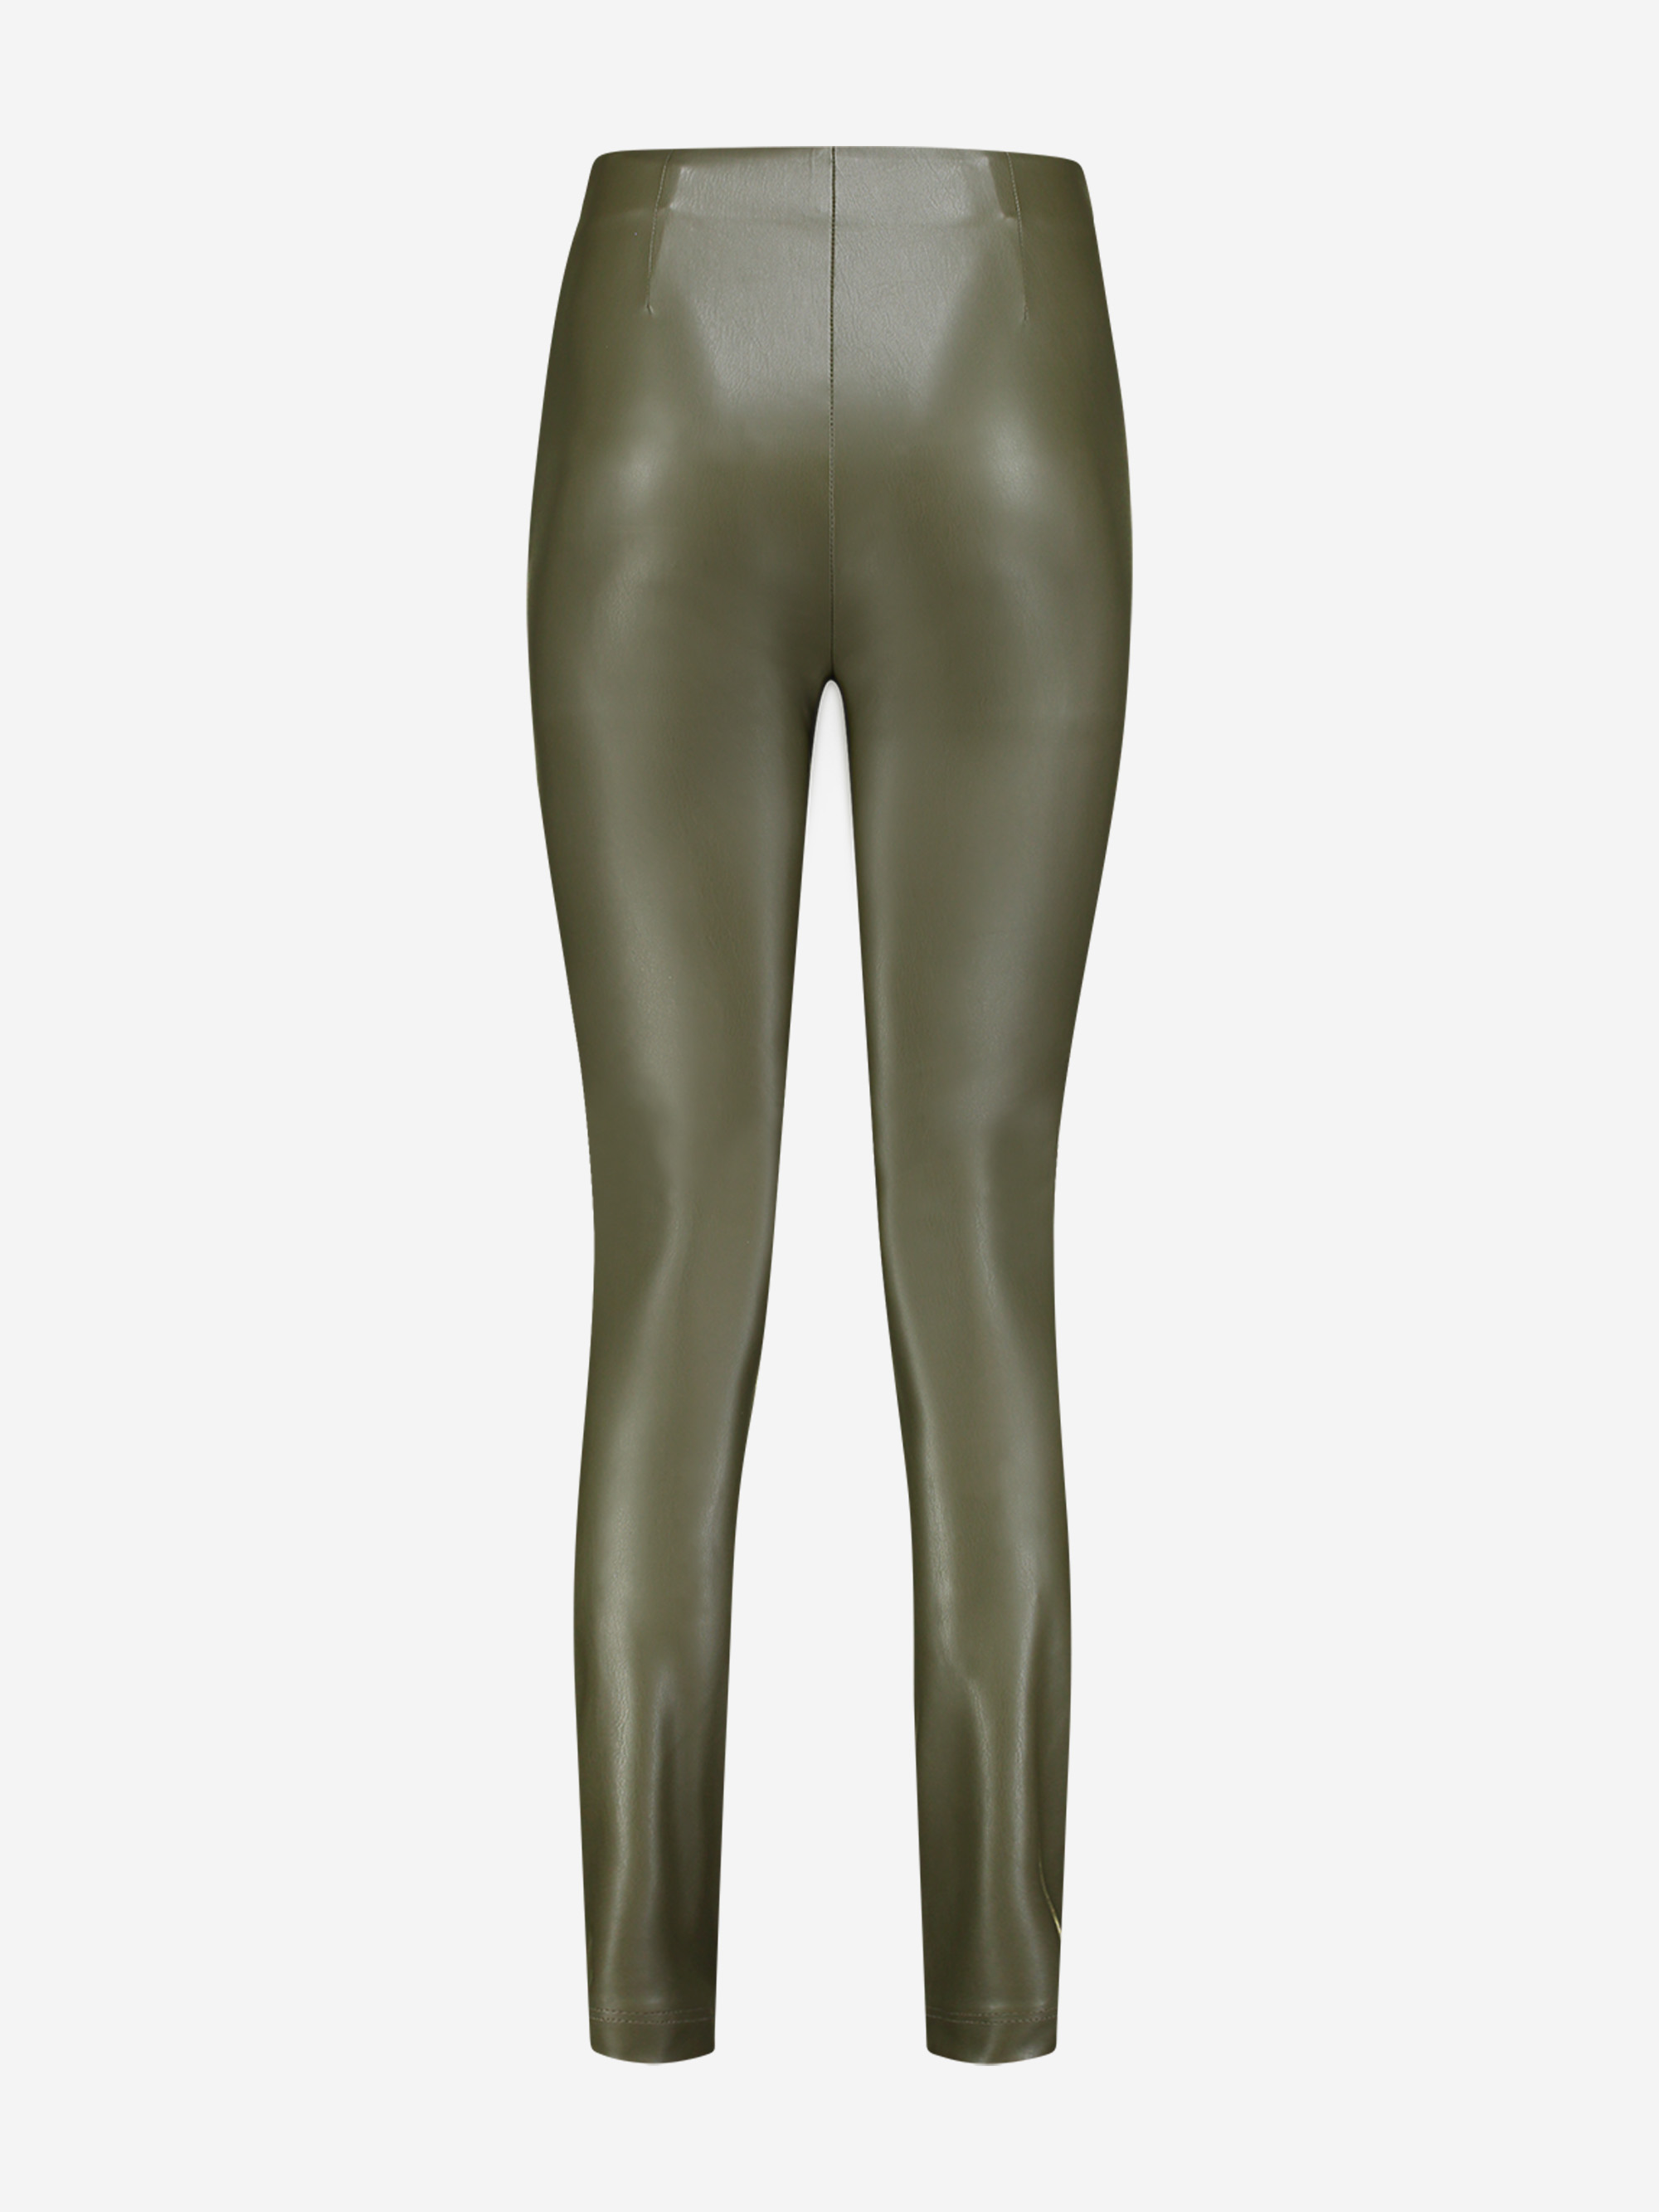 Vegan leather pants with high rise